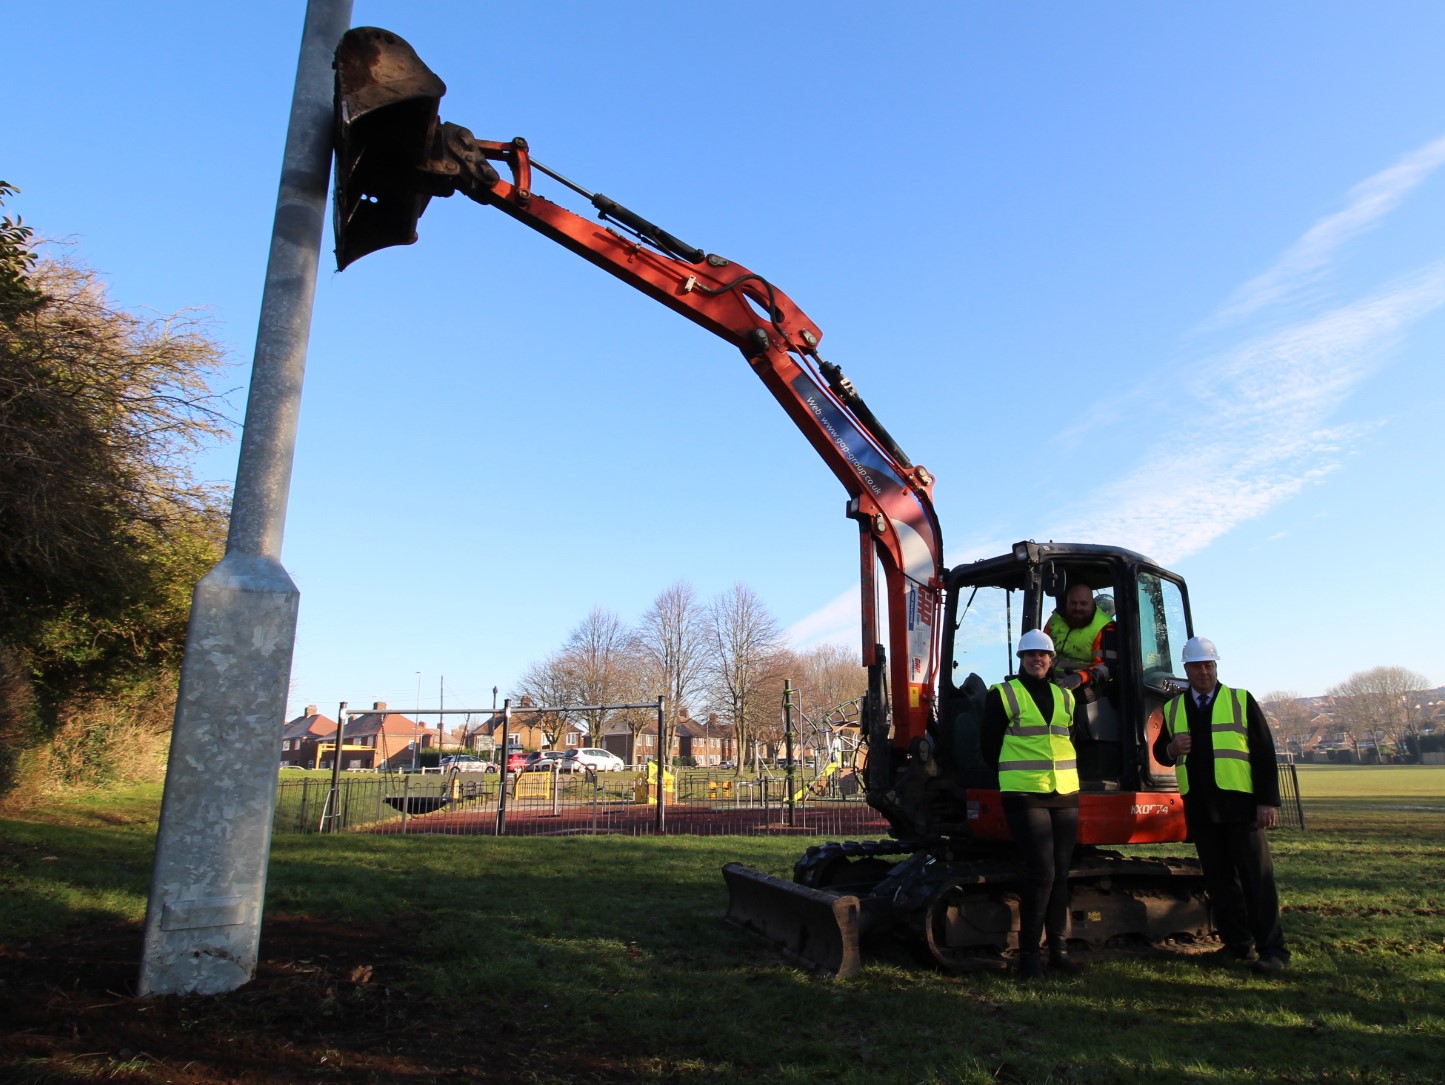 Gedling Borough Council Public Protection Officer with Portfolio Holder for Public Protection, Councillor David Ellis and contractors, next to the new CCTV tower at Killisick Recreation Ground. To the left the new CCTV tower can be seen and the park/play area is in the background. In the centre of the photo is a 